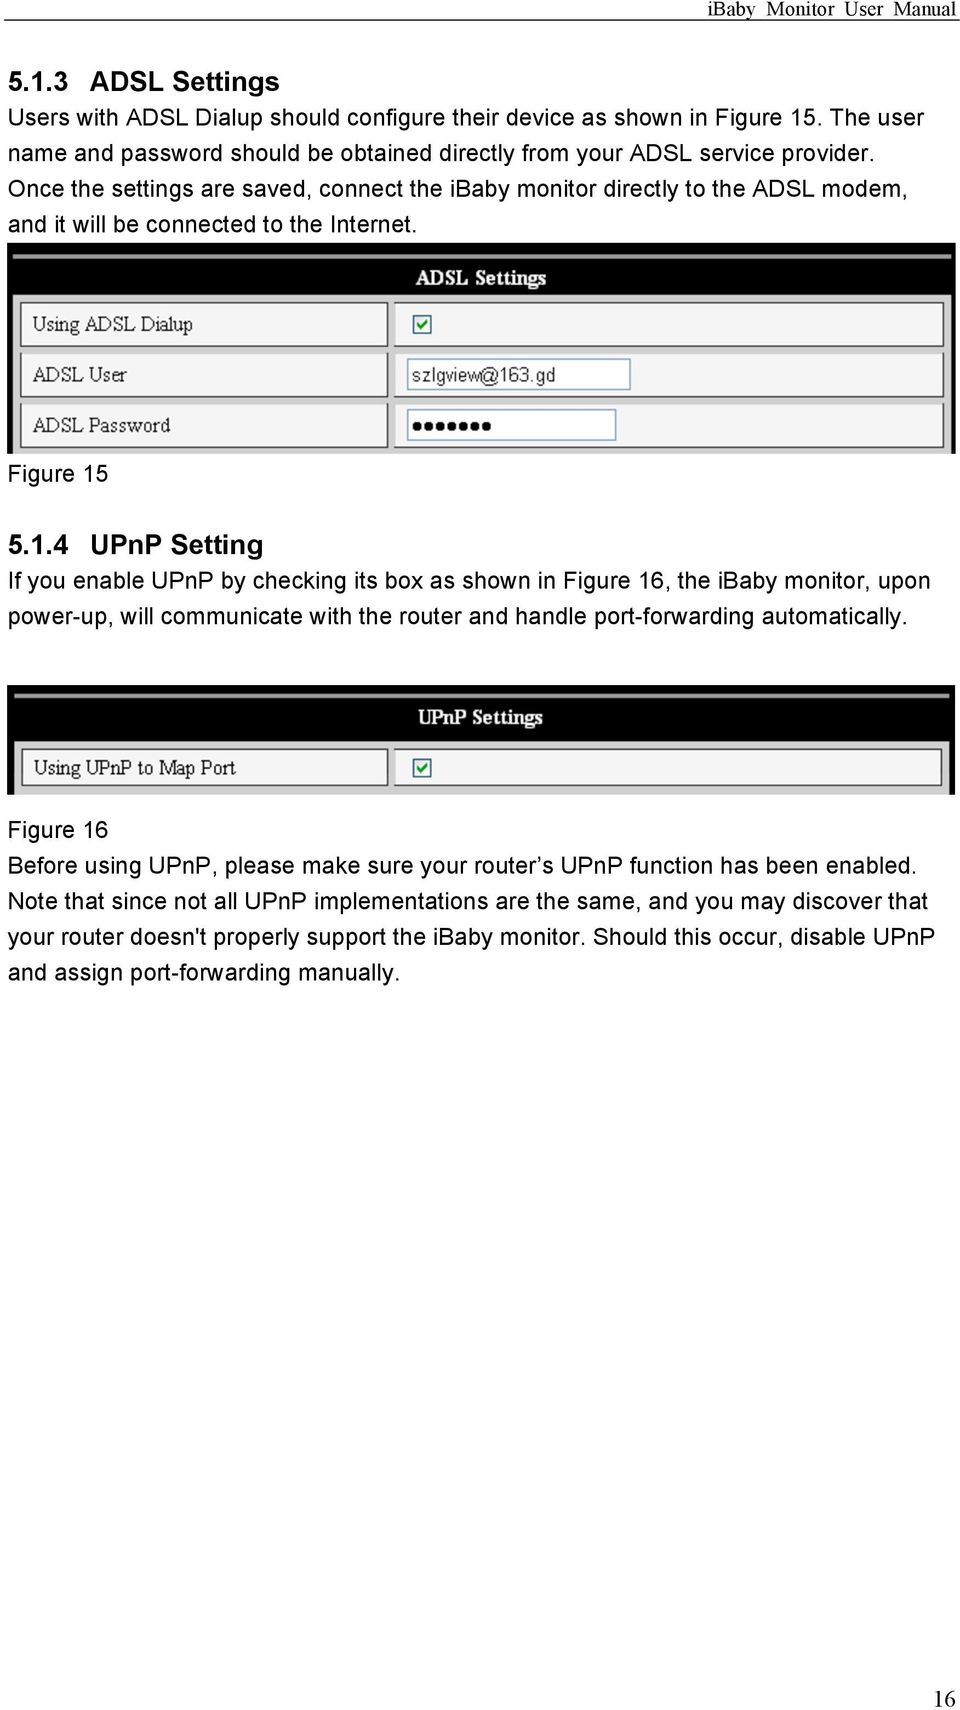 5.1.4 UPnP Setting If you enable UPnP by checking its box as shown in Figure 16, the ibaby monitor, upon power-up, will communicate with the router and handle port-forwarding automatically.